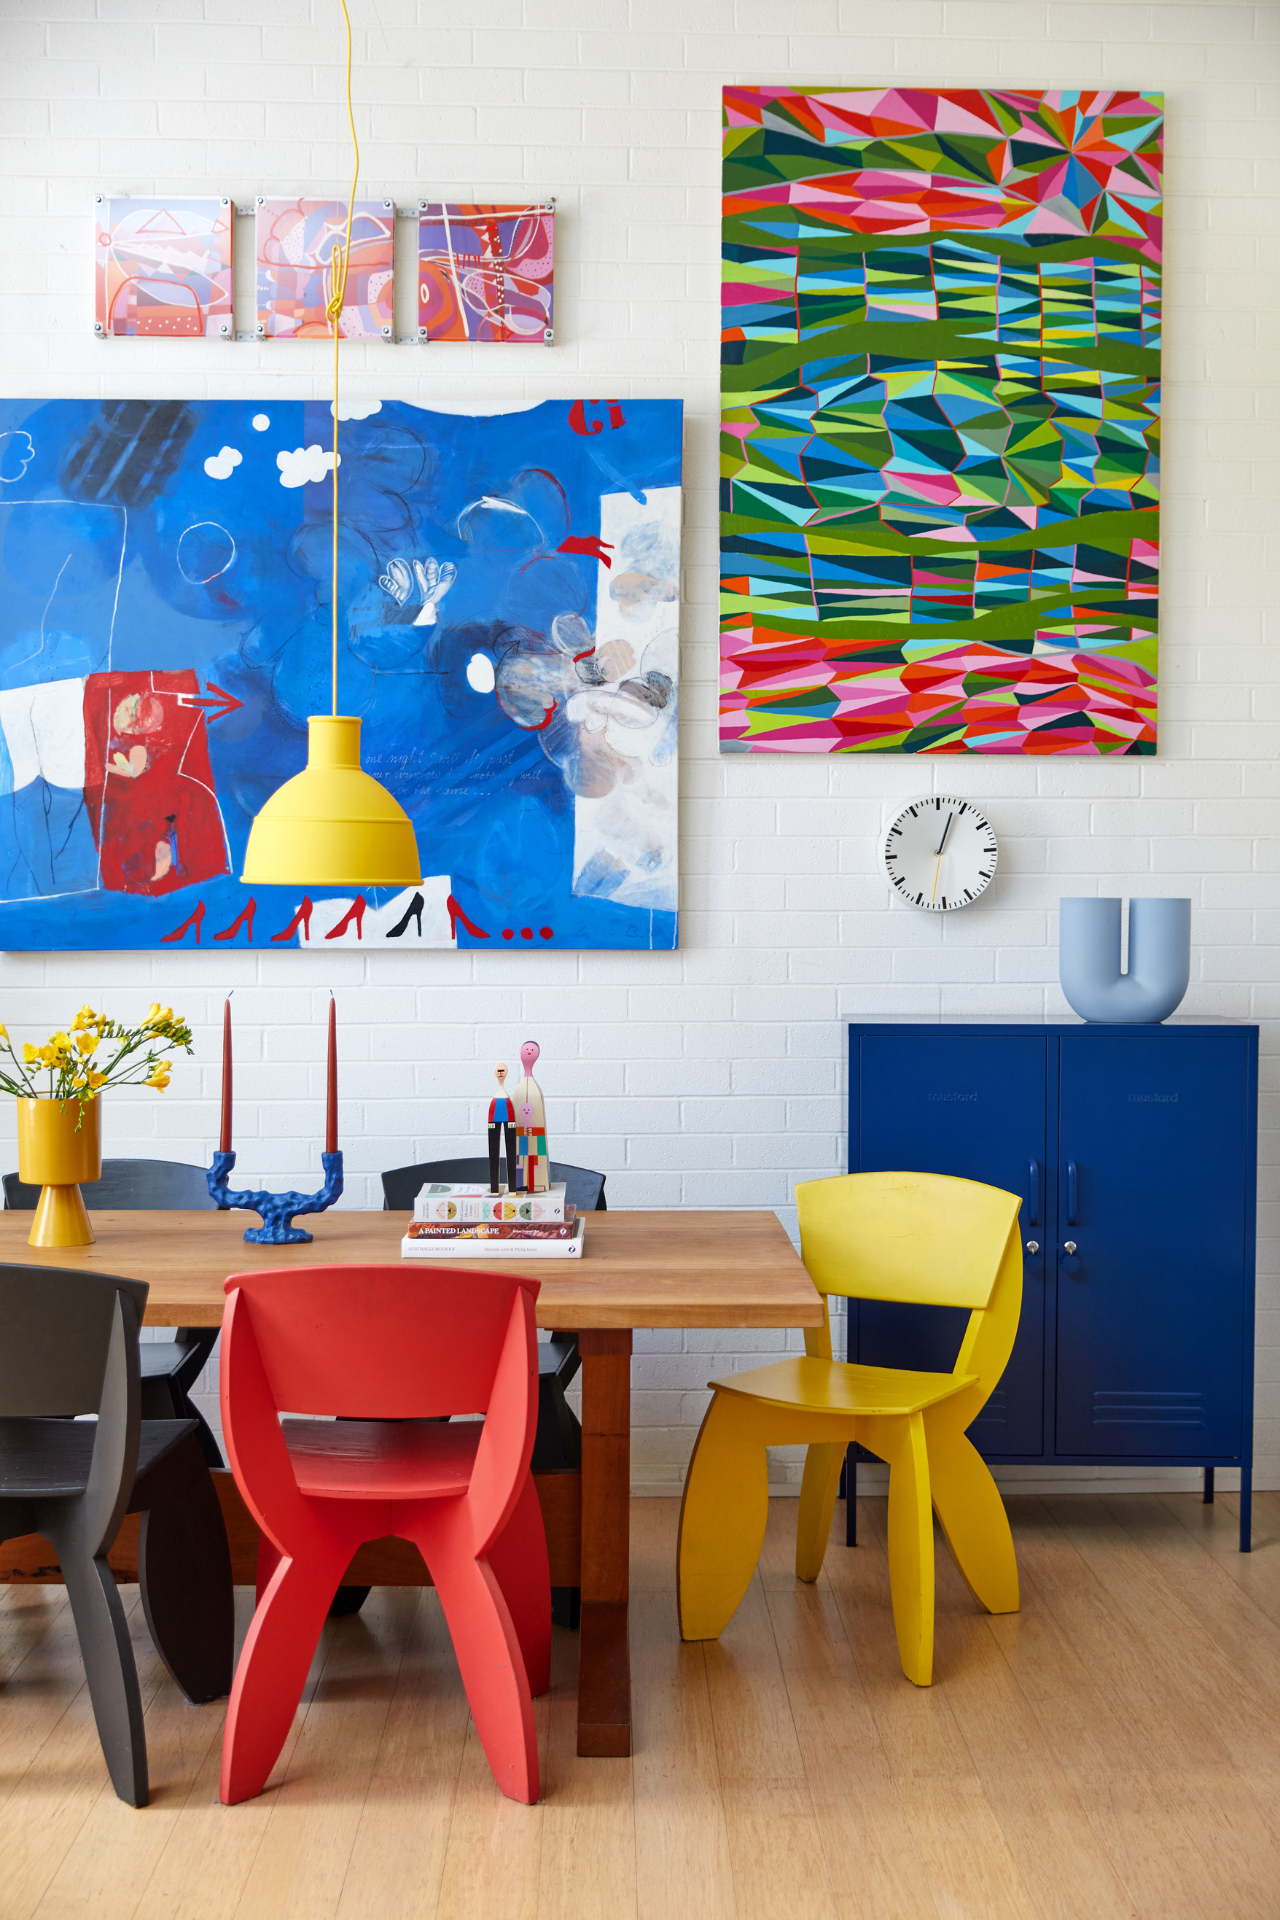 A close up of a dining table with large, brightly coloured artworks on the wall behind it.